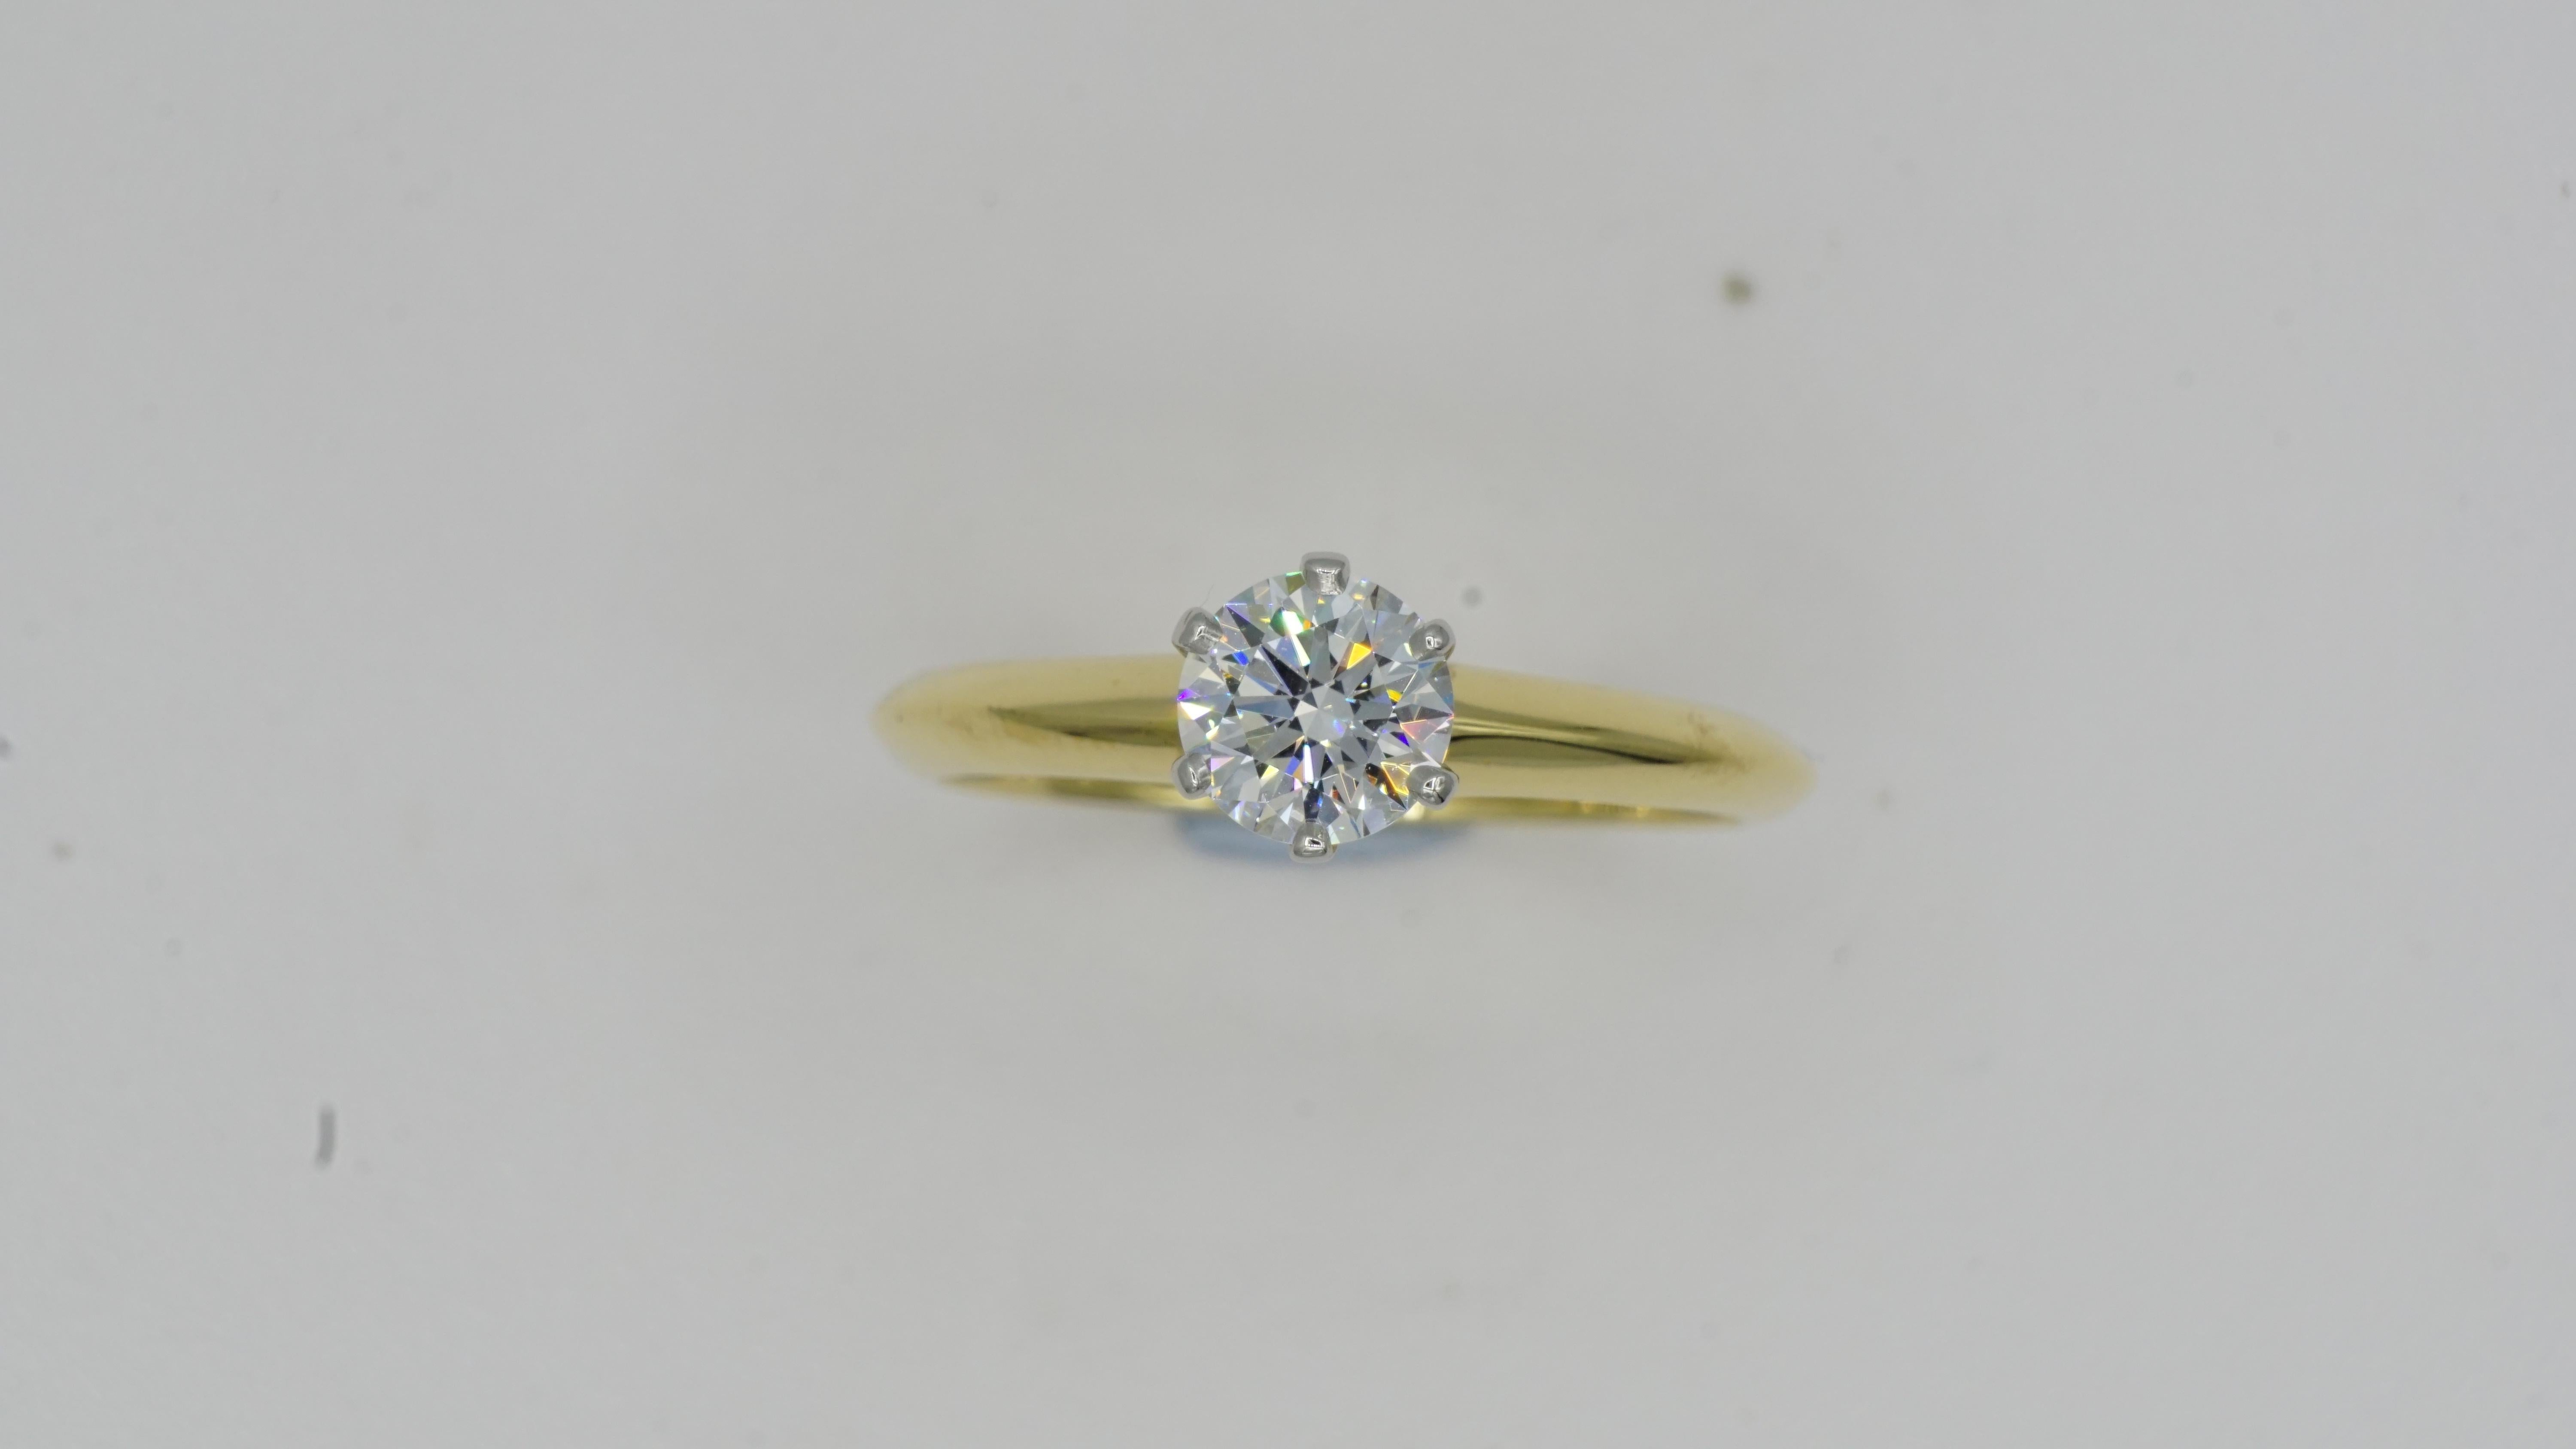 Tiffany & Co. .60ct Round Brilliant Diamond G/VVS1 Platinum 18kt Yellow Gold 6 Prong Solitaire Size 6. This comes with a Tiffany and Co Certificate.
This is a set and can be sold separately if desired.
The engagement ring weighs 2.9 grams total and